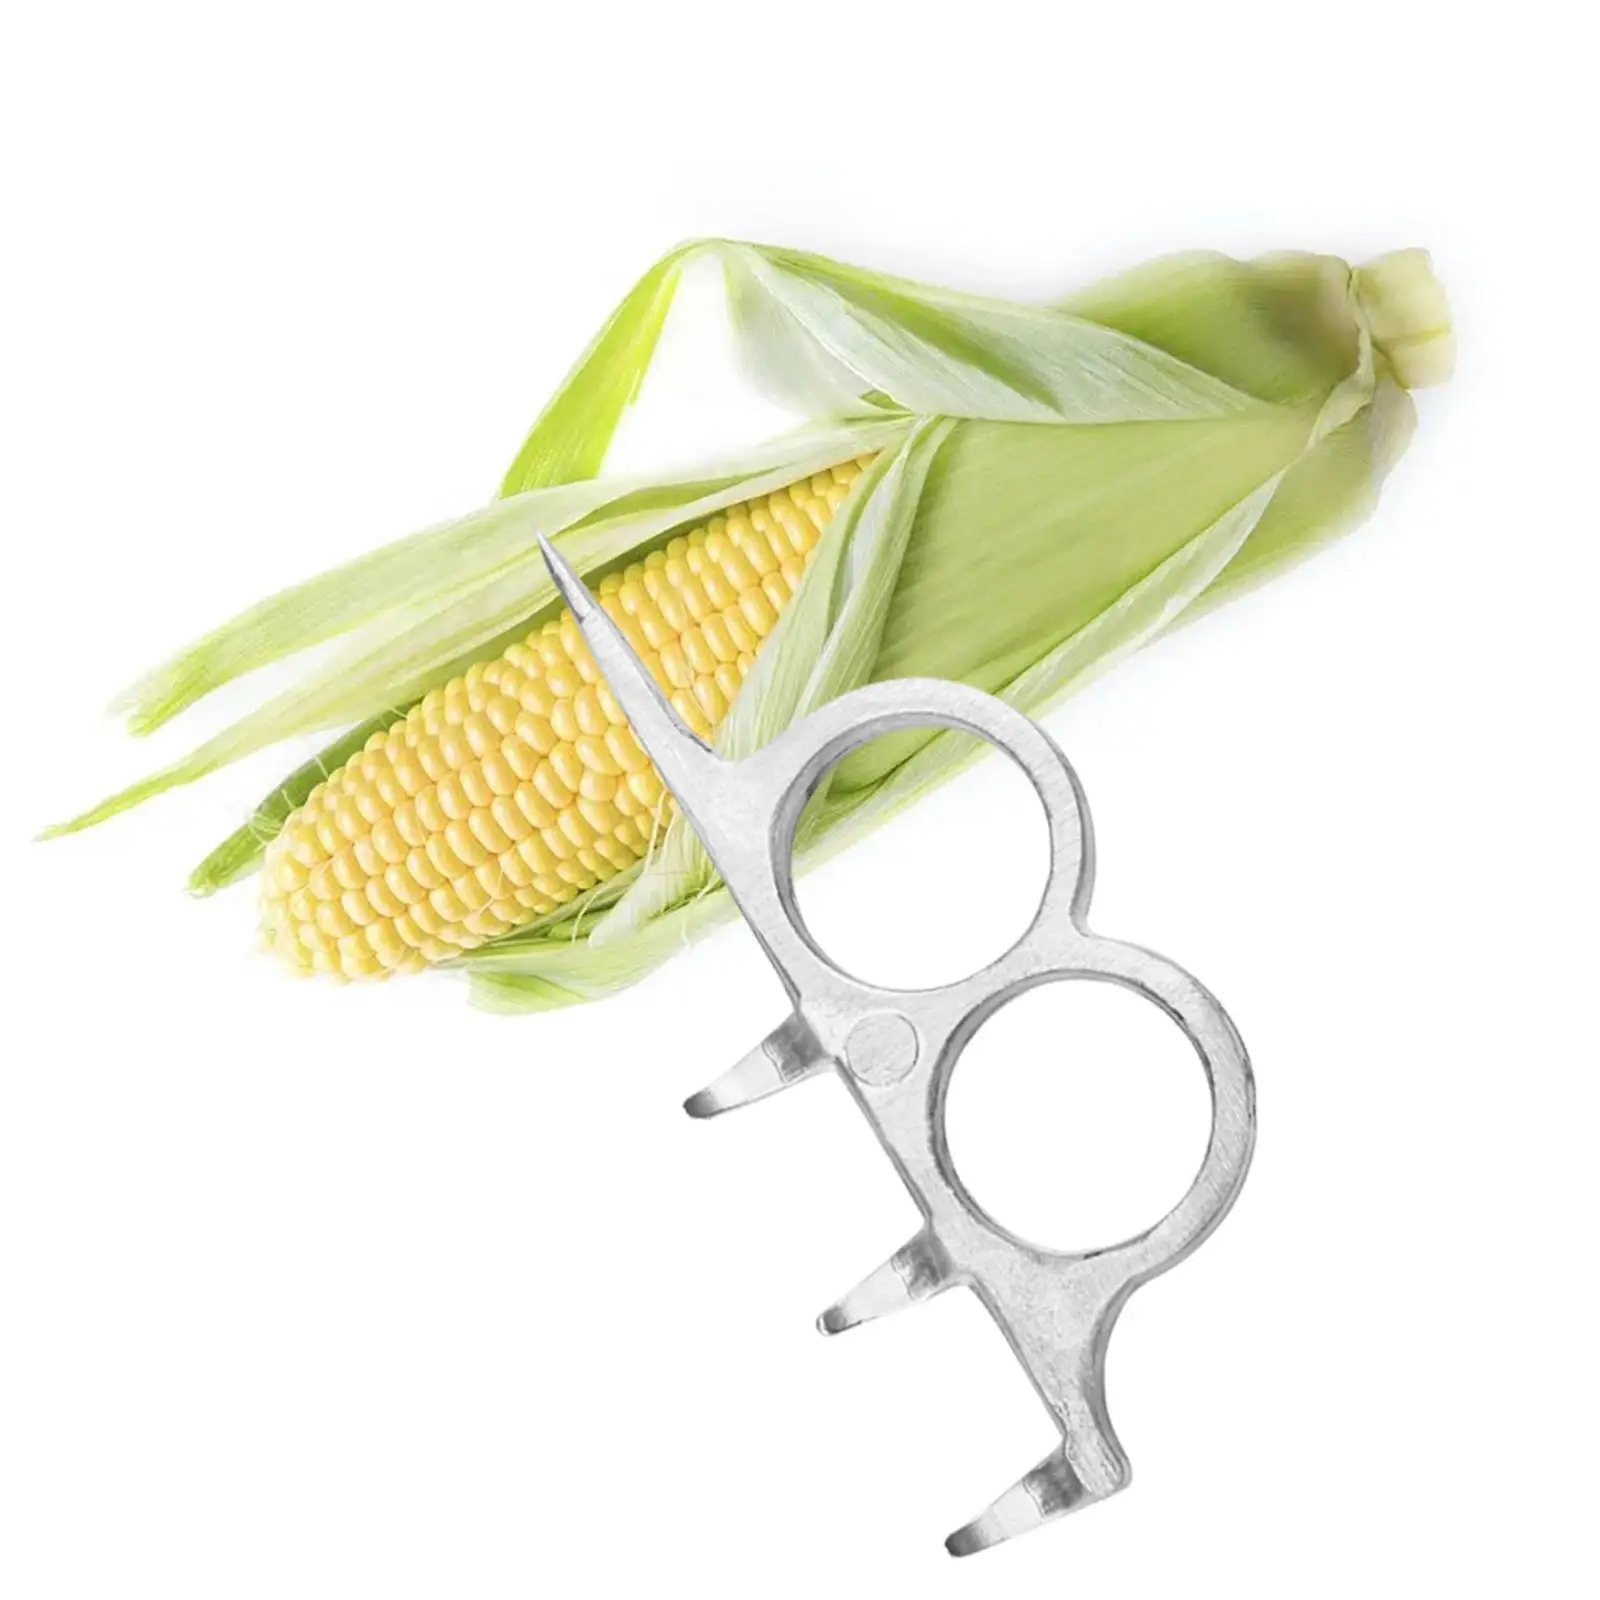 Aluminum Alloy Coin Remover Quick Peeling Utensils Corn Peeling Tool for Groceries Agricultural Kitchen Restaurant